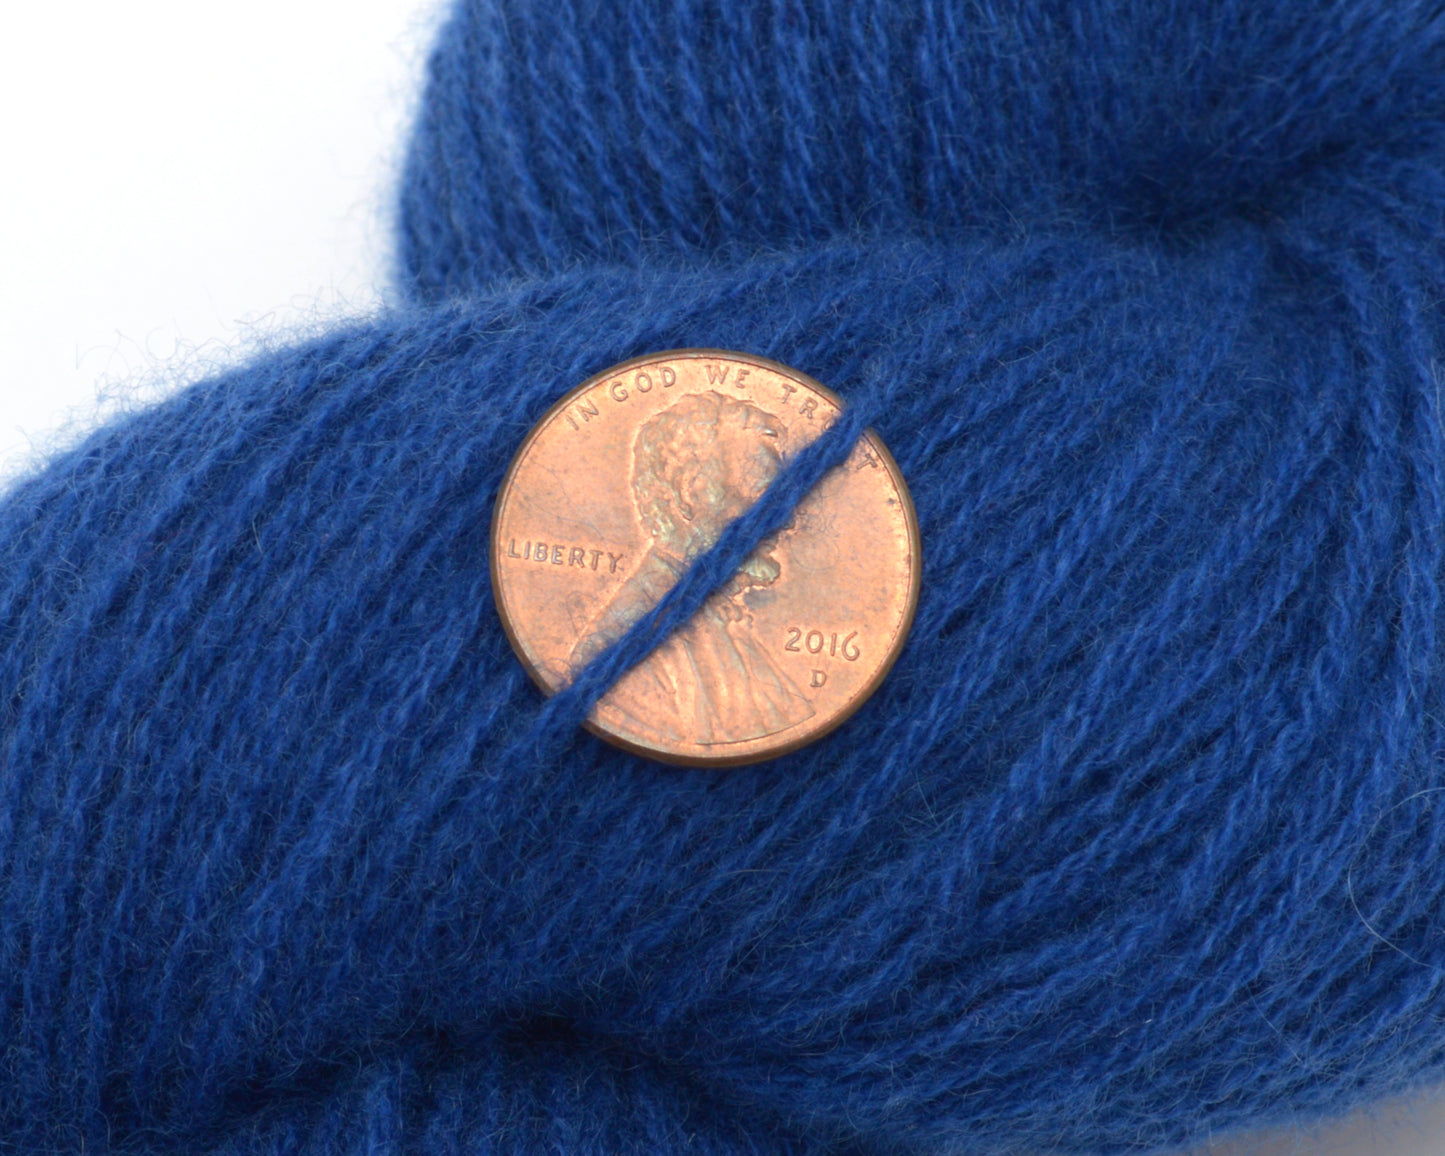 Fingering Weight Recycled Cashmere Yarn in Nautical Blue